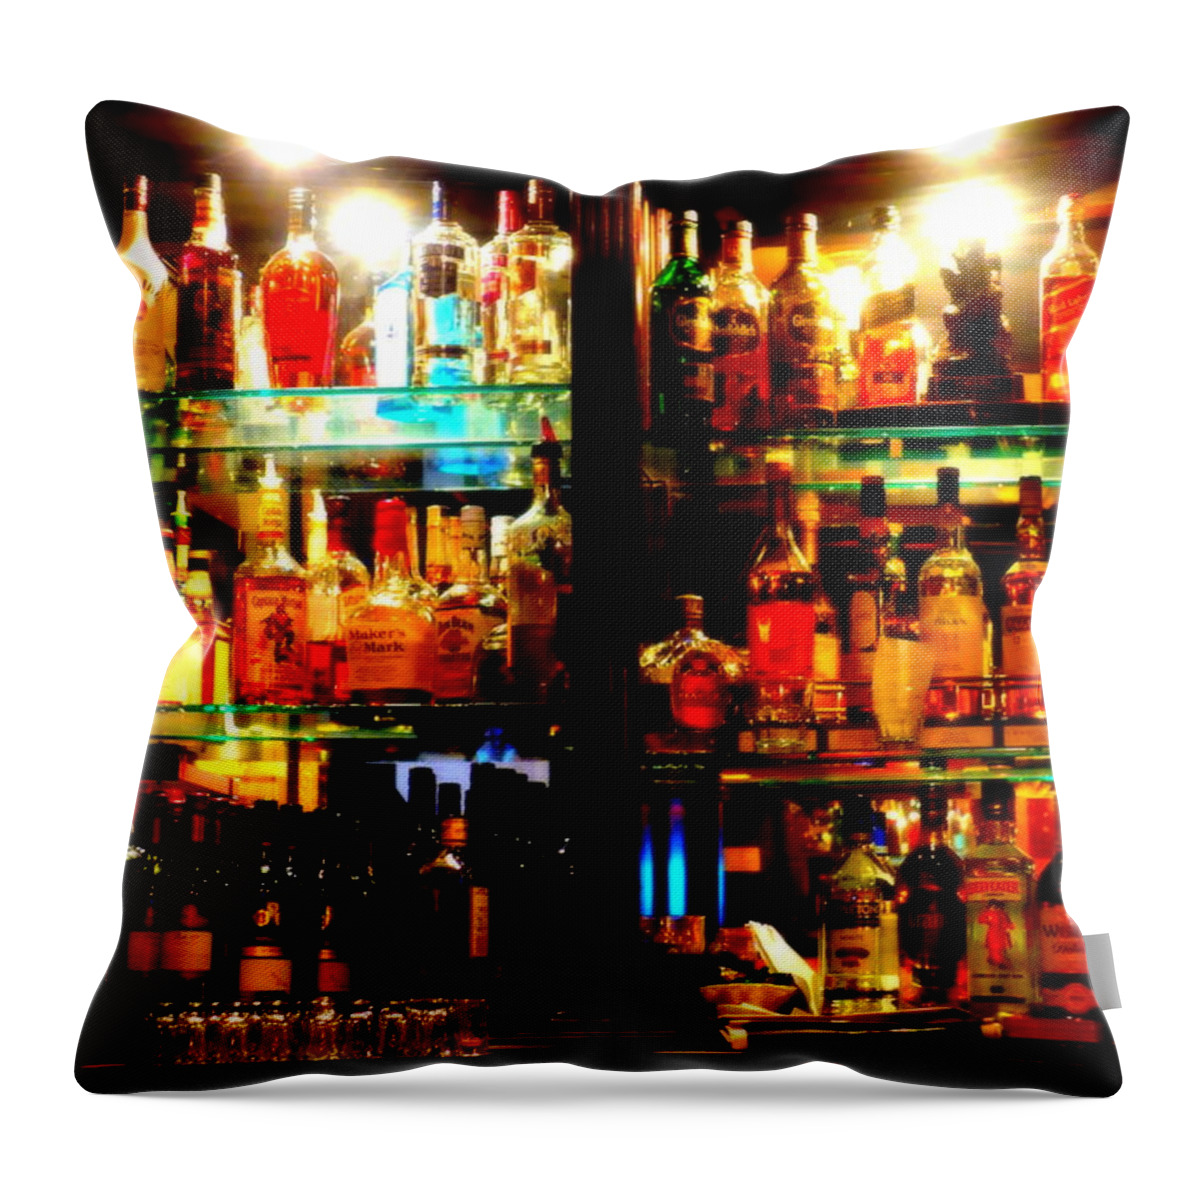 Spirits Throw Pillow featuring the photograph Spirits by Valentino Visentini